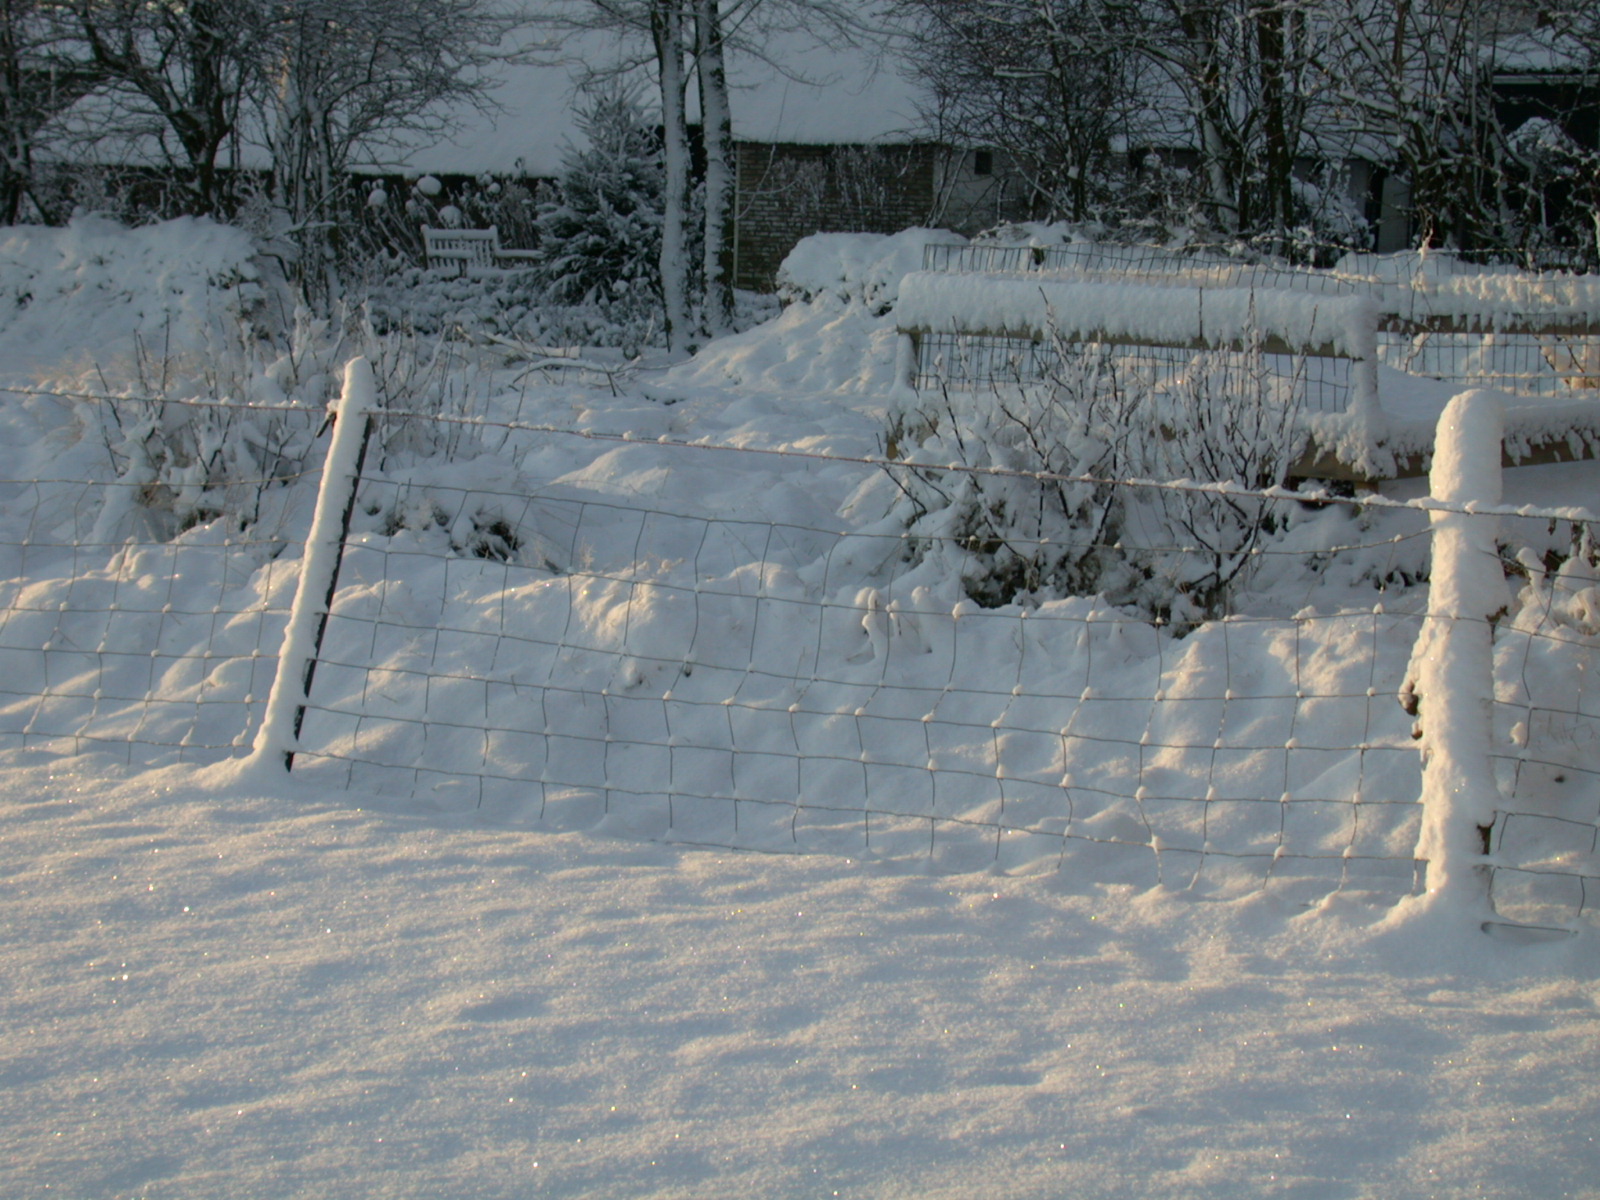 nature landscapes winter snow fence white garden backyard royalty free